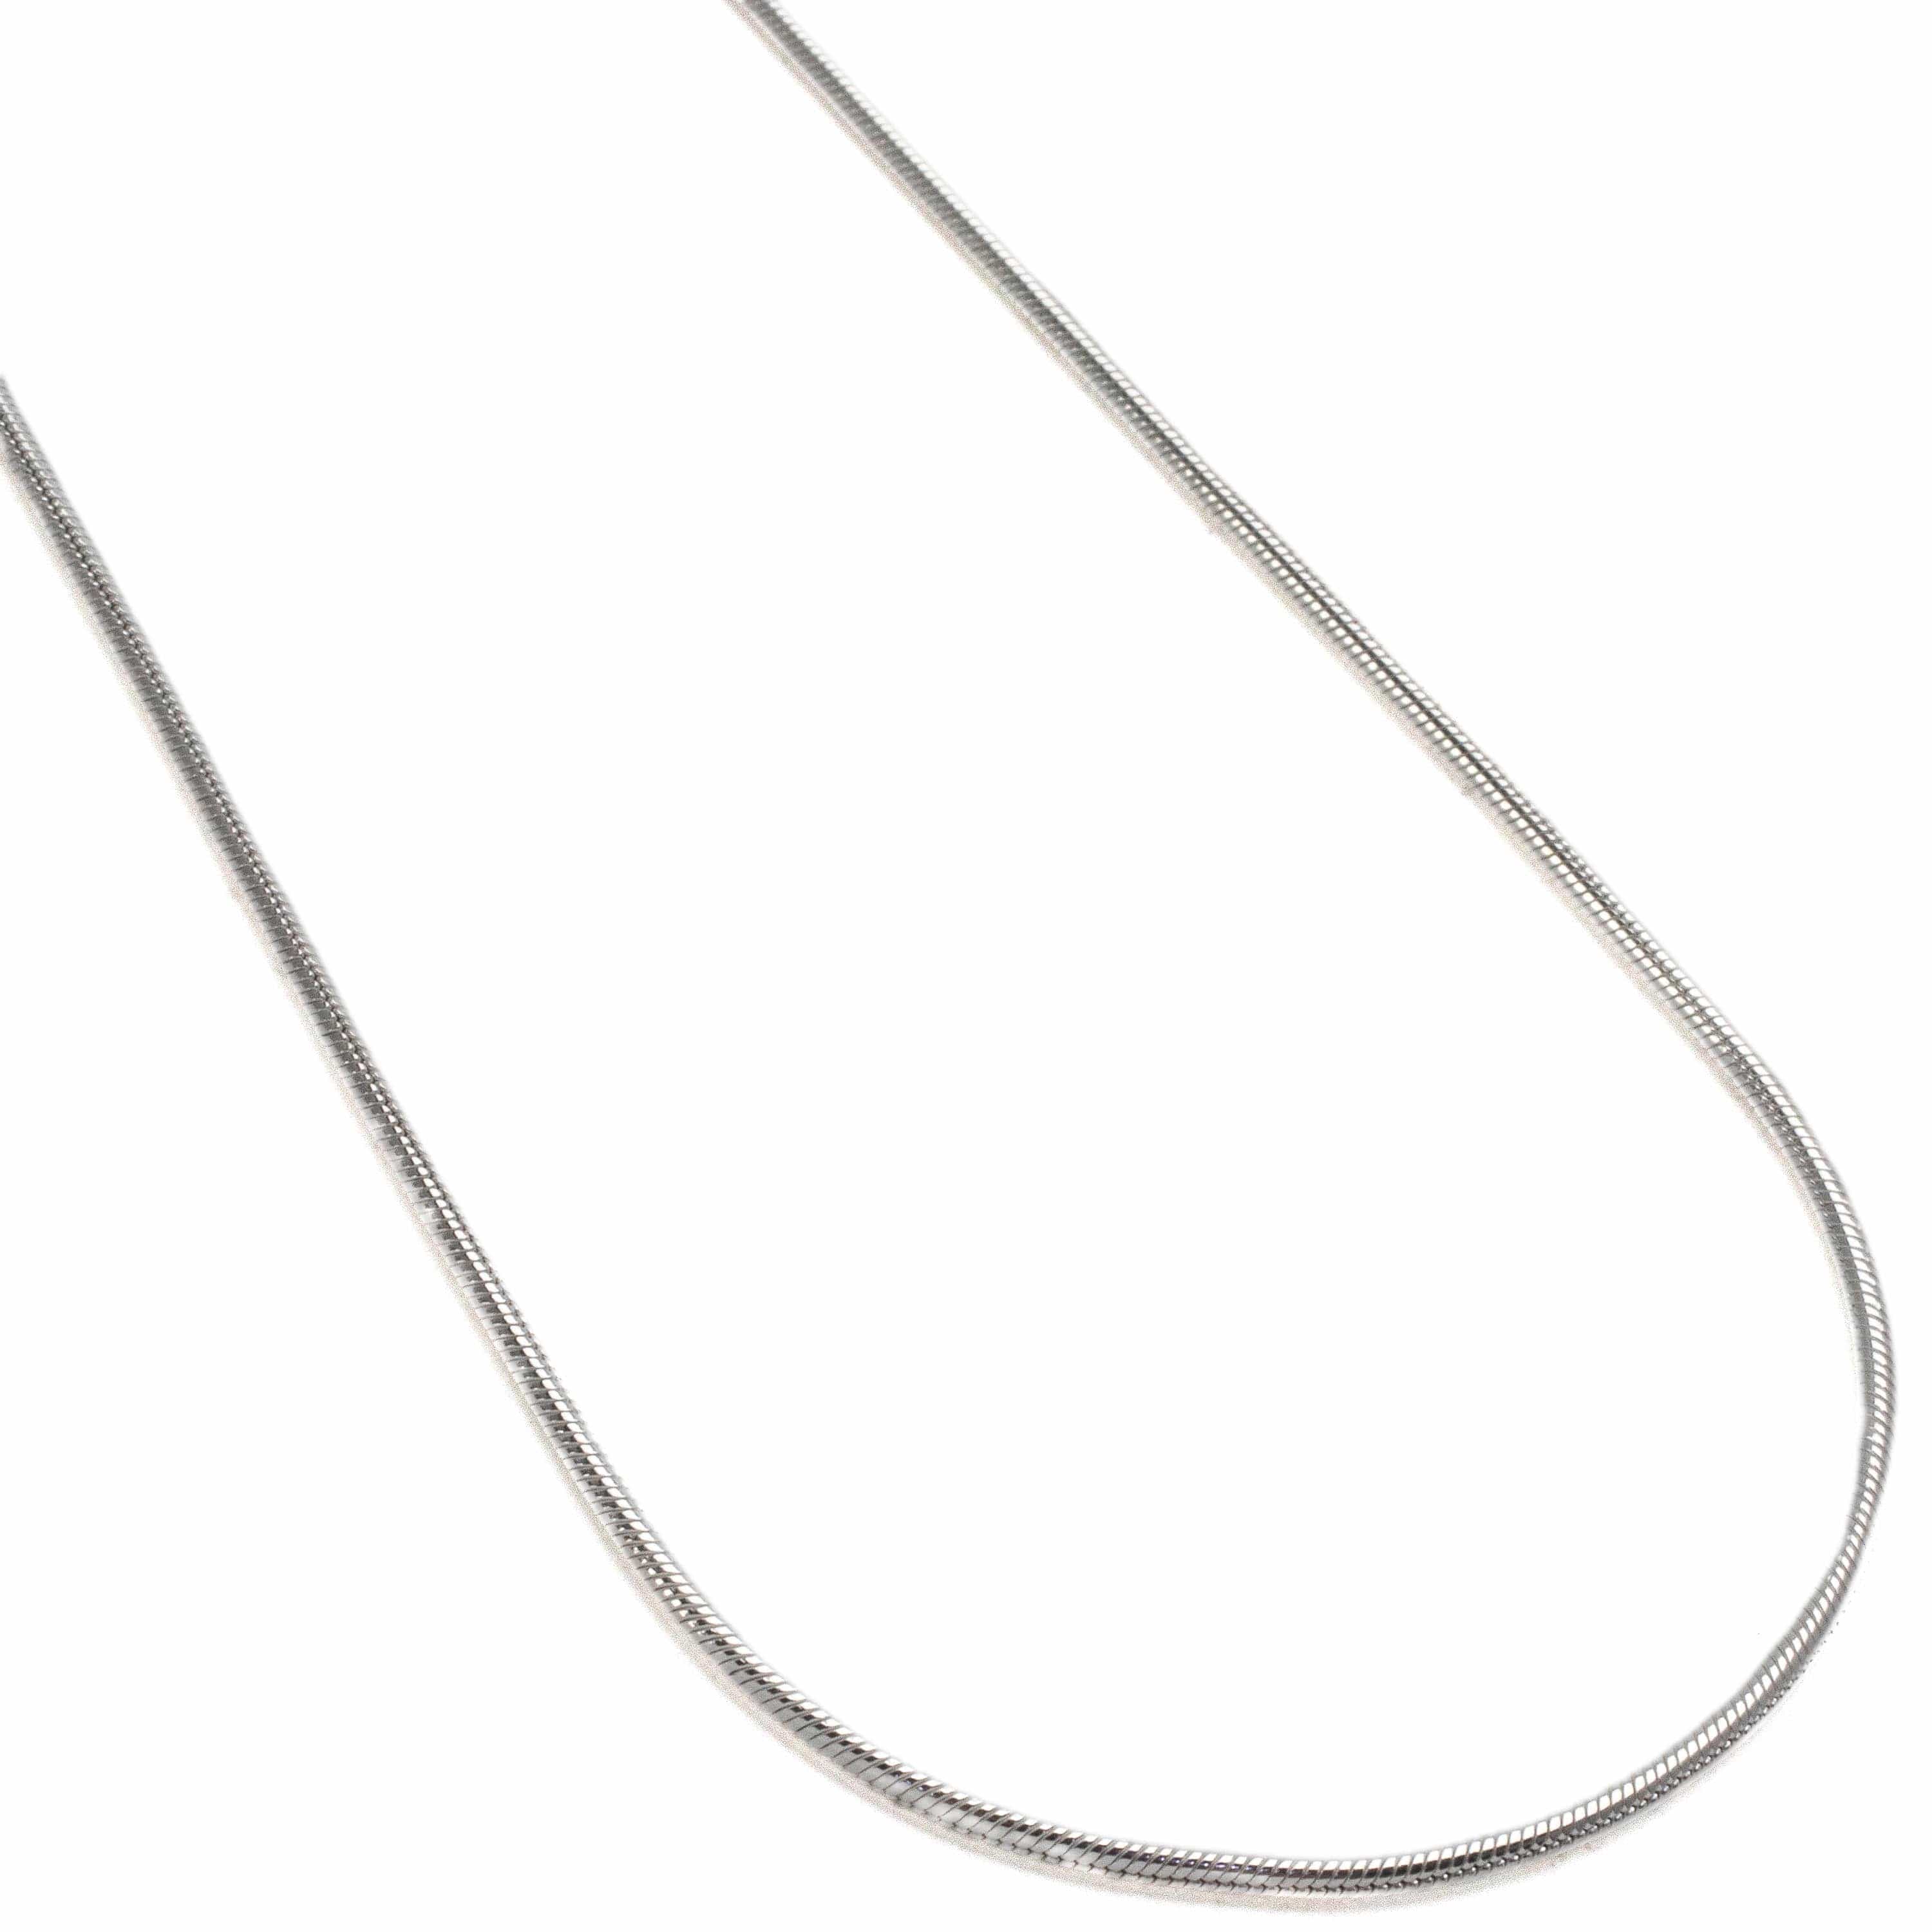 Kalifano Sterling Silver Chains 22" Italian Sterling Silver Snake Chain Necklace 1.5mm SCA-SNK040-22